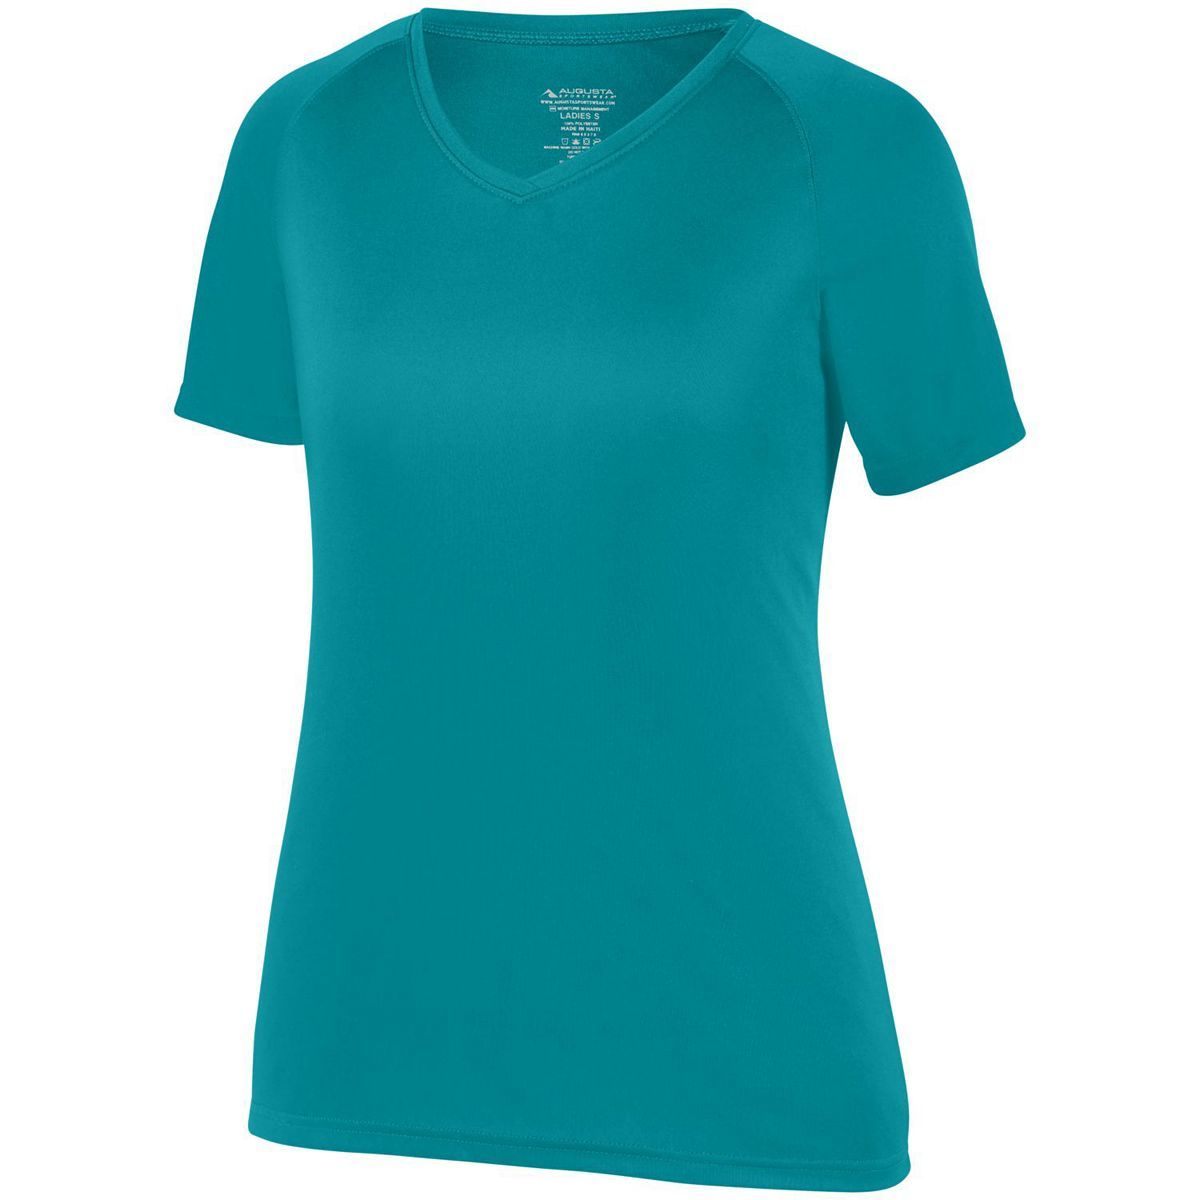 Augusta Sportswear Girls Attain Wicking Raglan Sleeve Tee in Teal  -Part of the Girls, T-Shirts, Augusta-Products, Girls-Tee-Shirt, Shirts product lines at KanaleyCreations.com